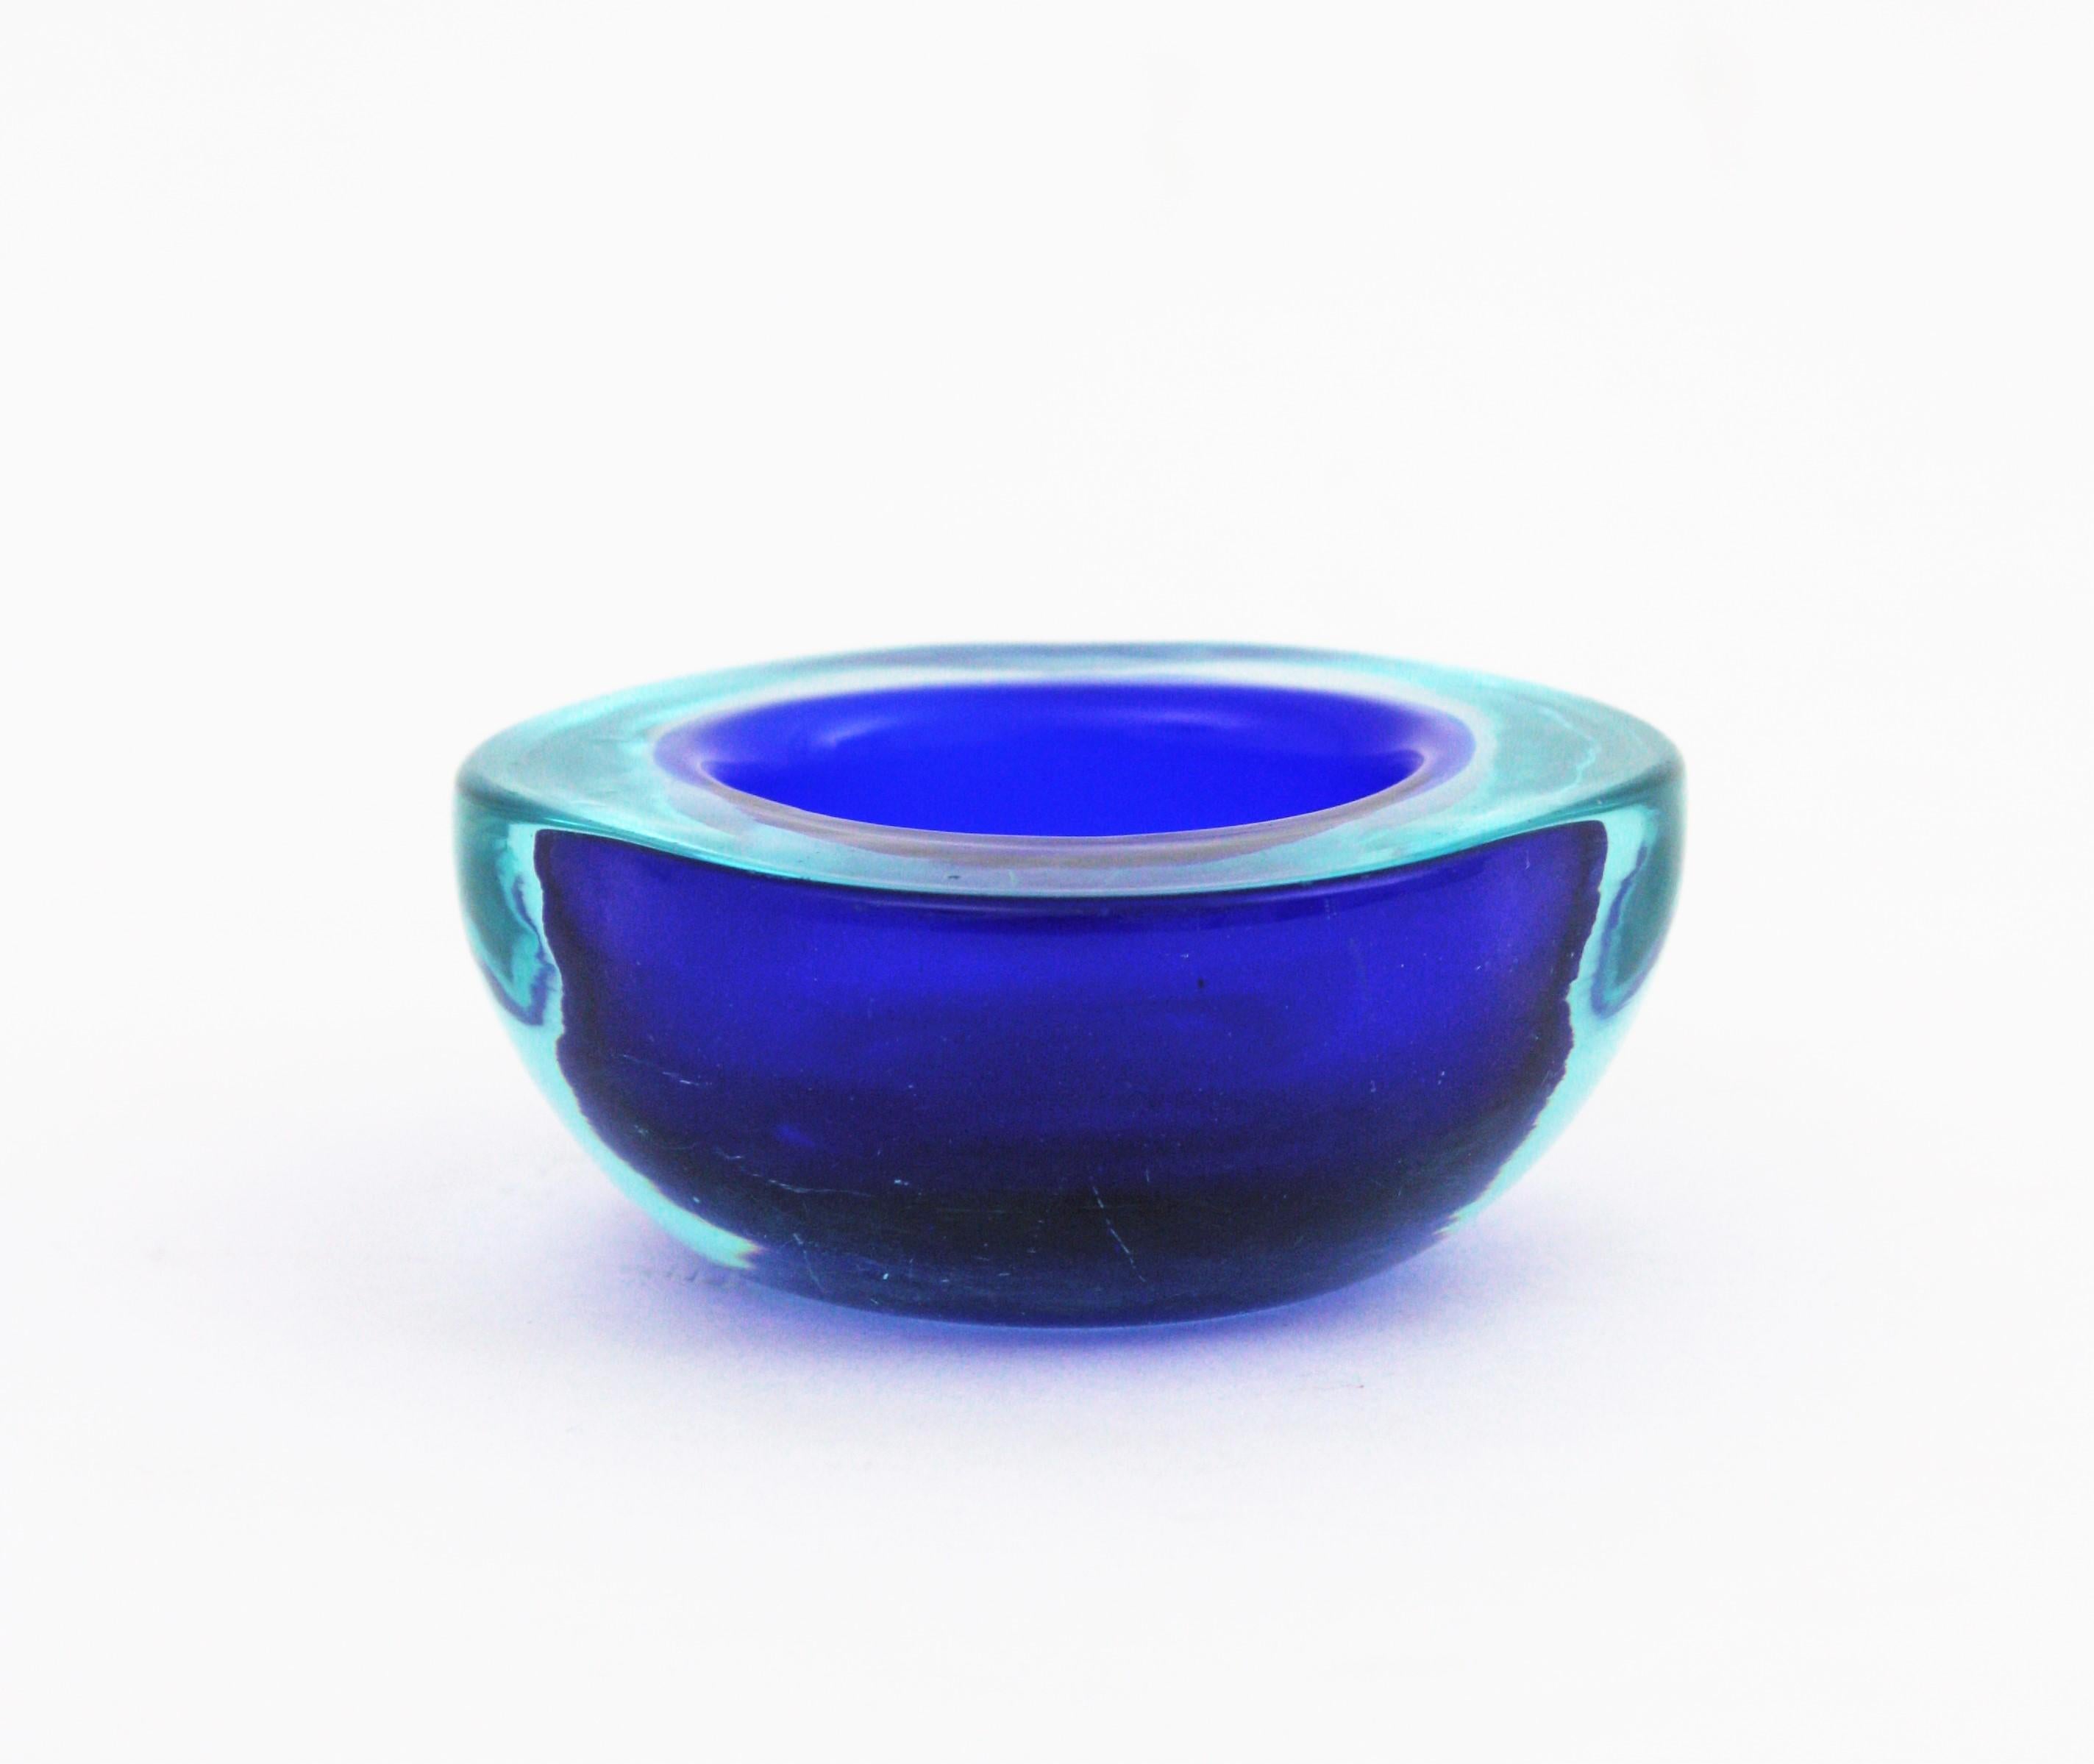 Italian Archimede Seguso Murano Small Sommerso Blue Glass Geode Bowl, 1960s For Sale